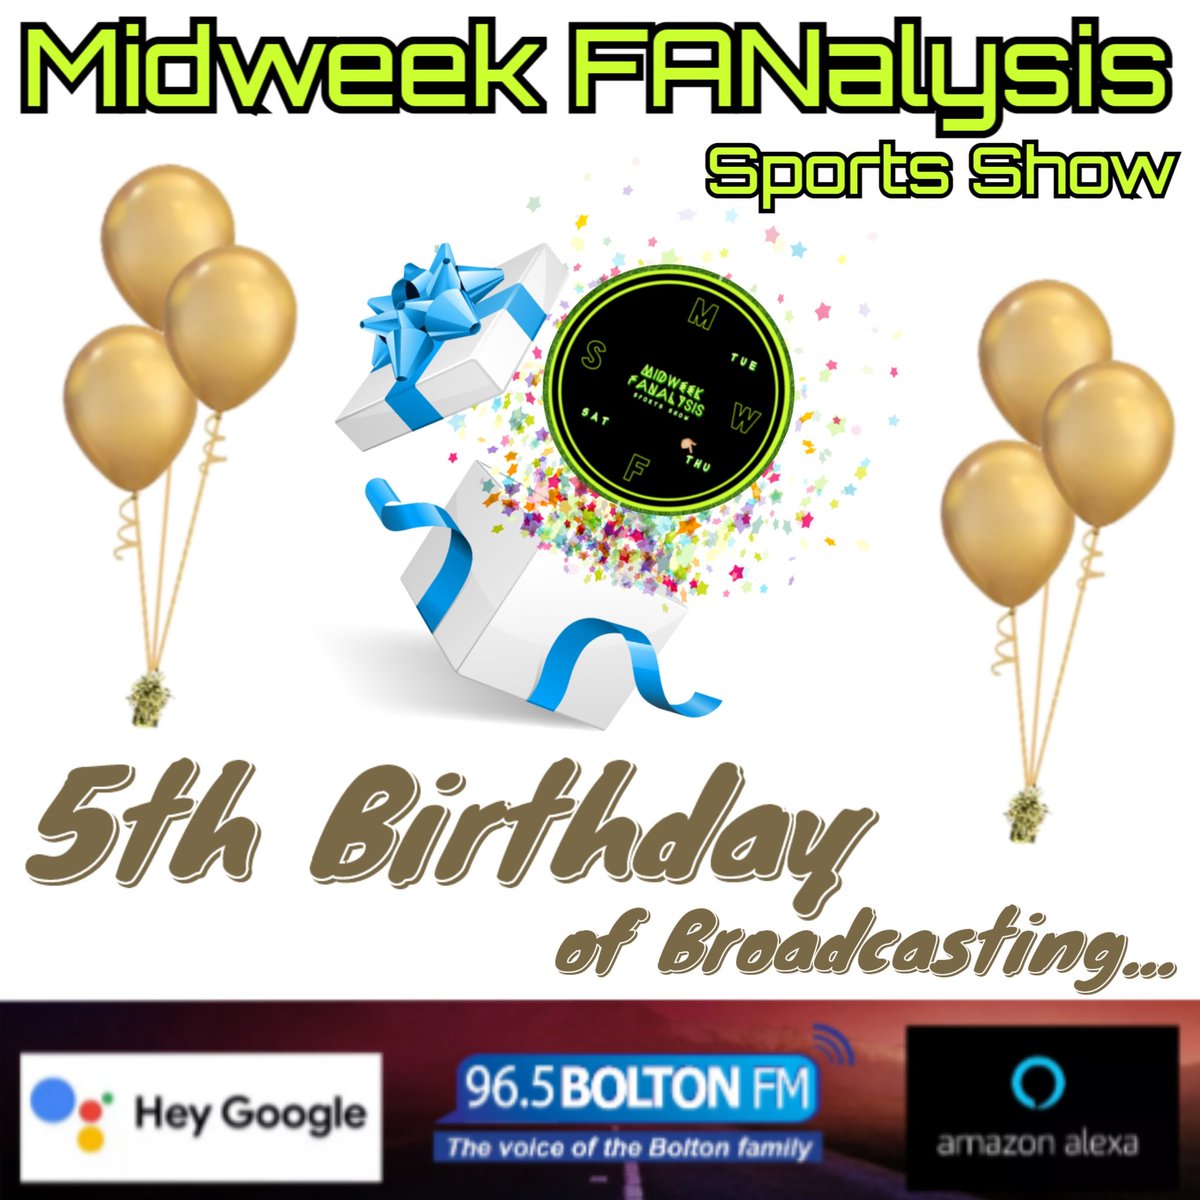 Happy 5th Birthday to @MWK_FANALYSIS! 🙏🏻🙌🏻🎉🎈🎊 Show 1 airing on this night at this time 5 Years Ago! 🙏🏻 To My Brother Kian, Bobby, Peter & everyone that has joined us in the studio as panel members and to guests & our valued listeners - as we embark 248 - 249 and 250!